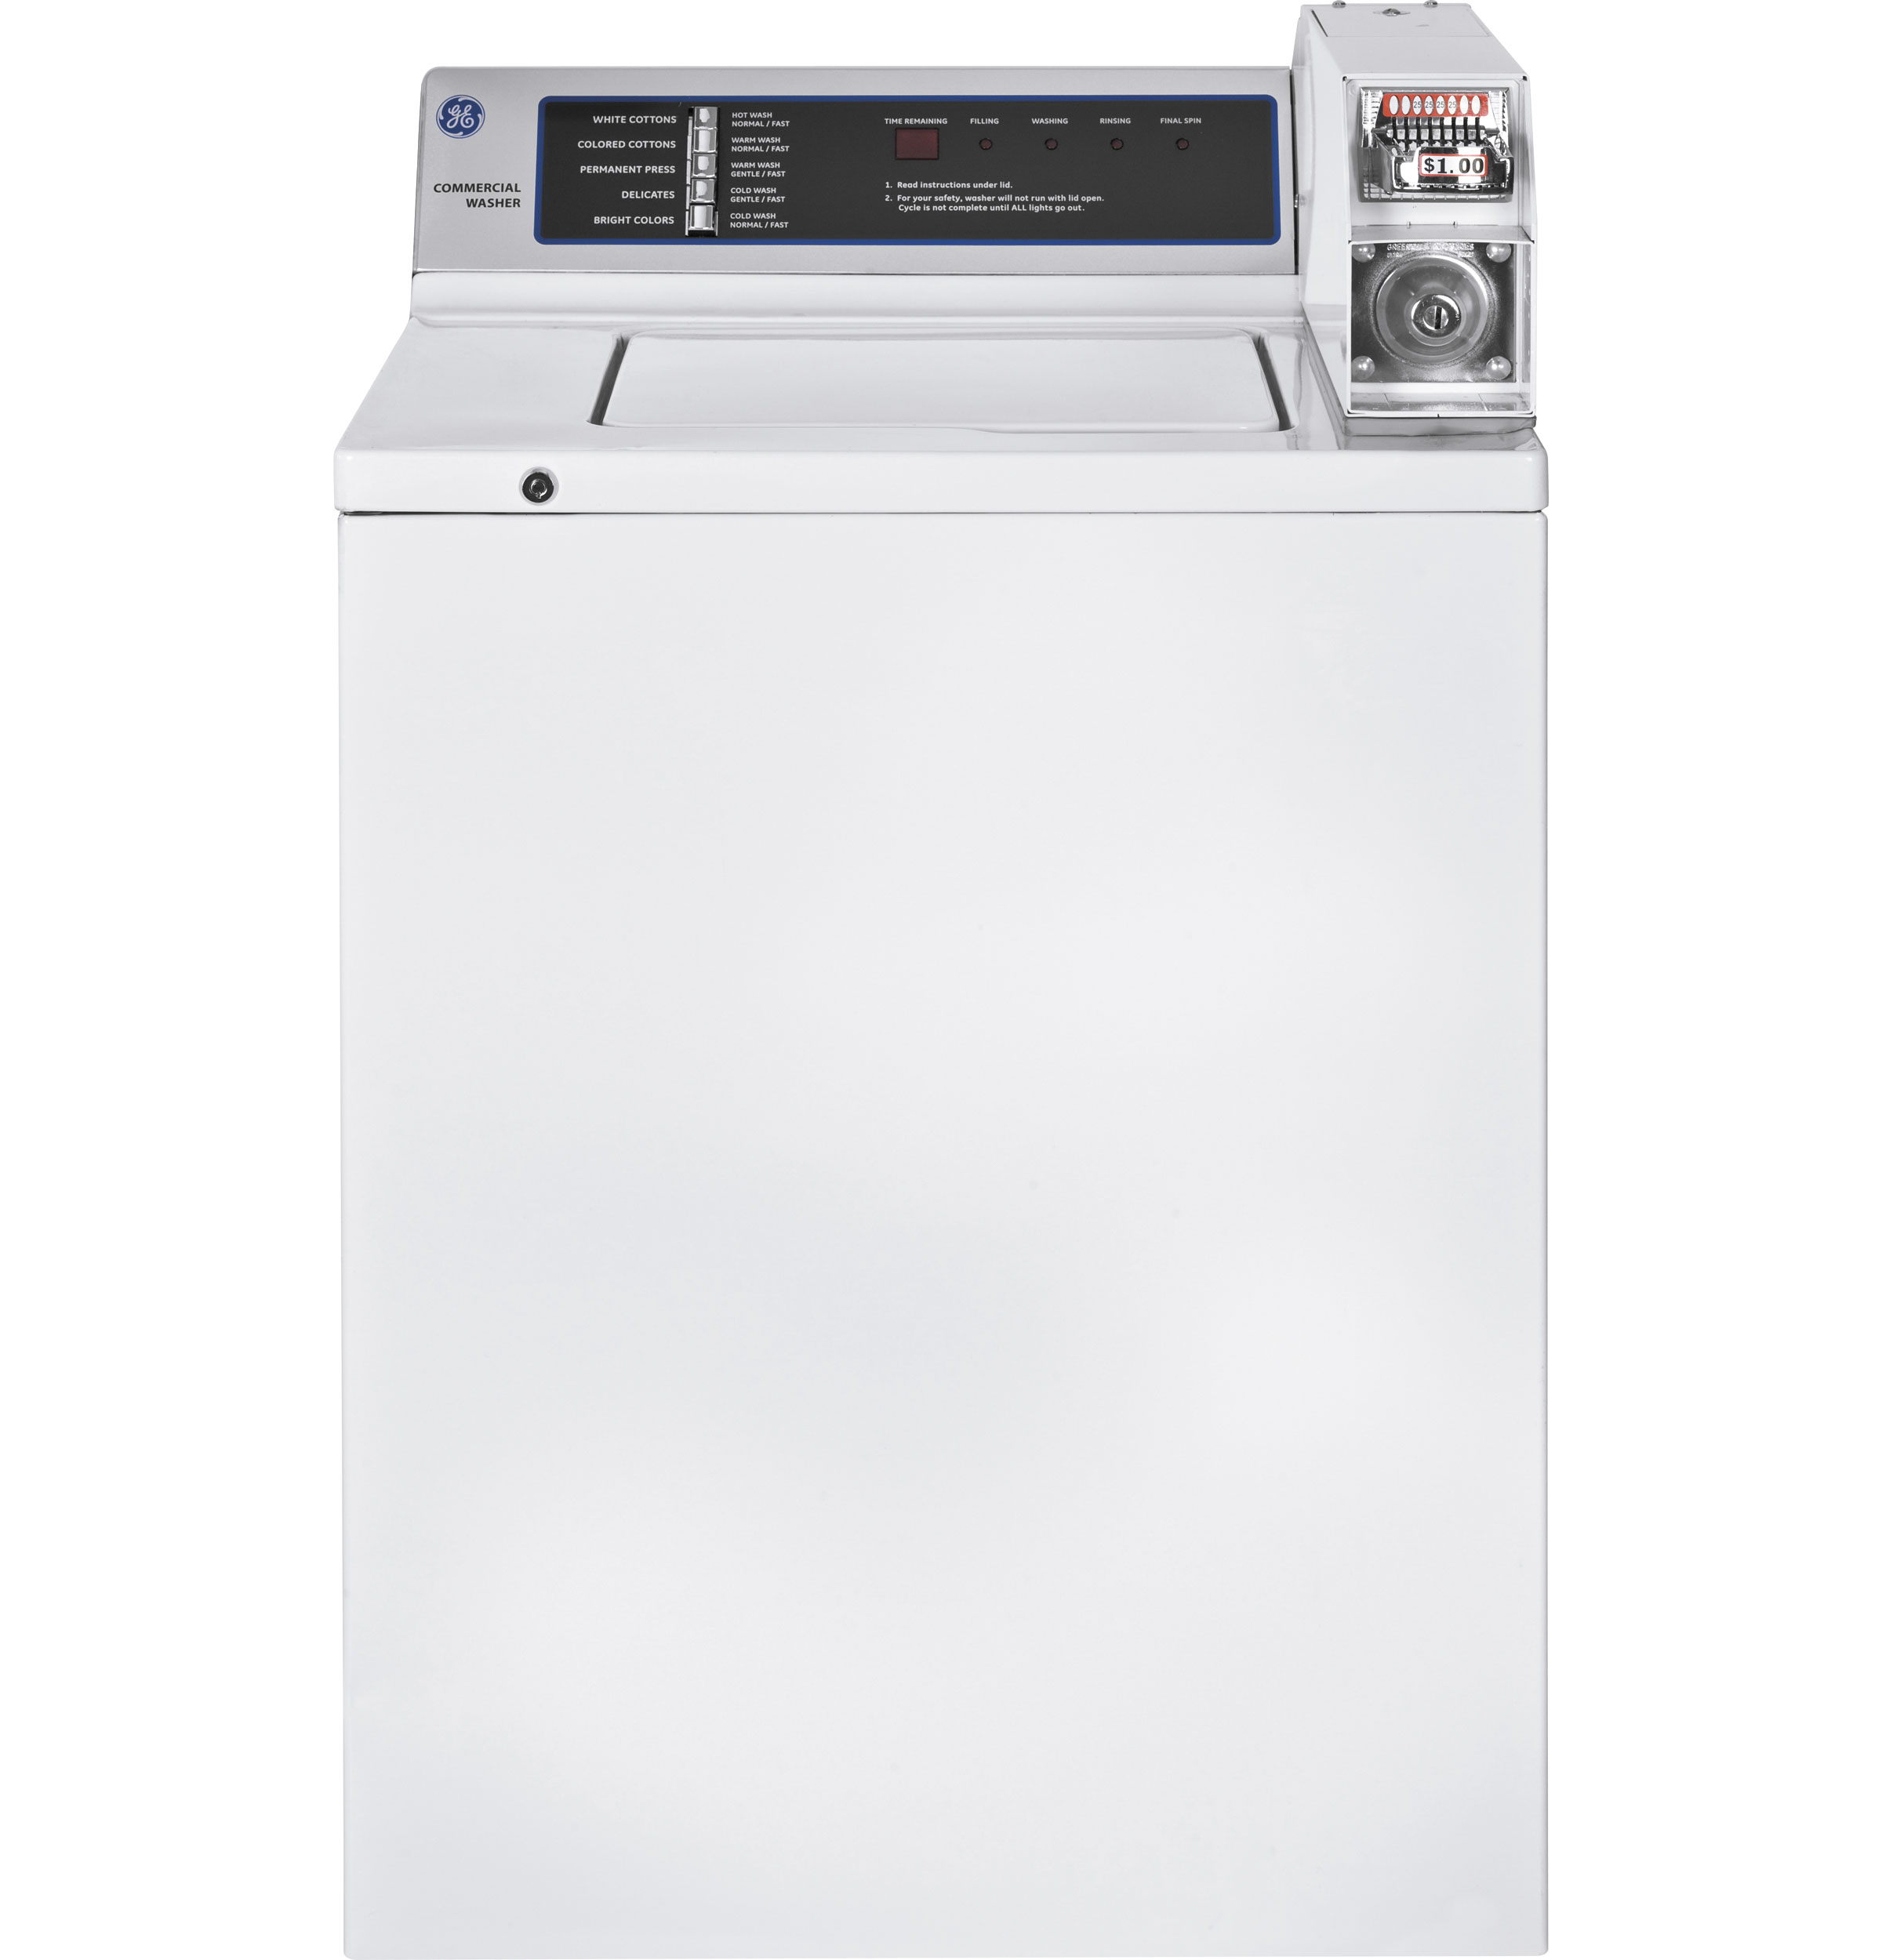 GE® 3.5 Cu. Ft. Capacity Coin-Operated Washer with Stainless Steel Basket